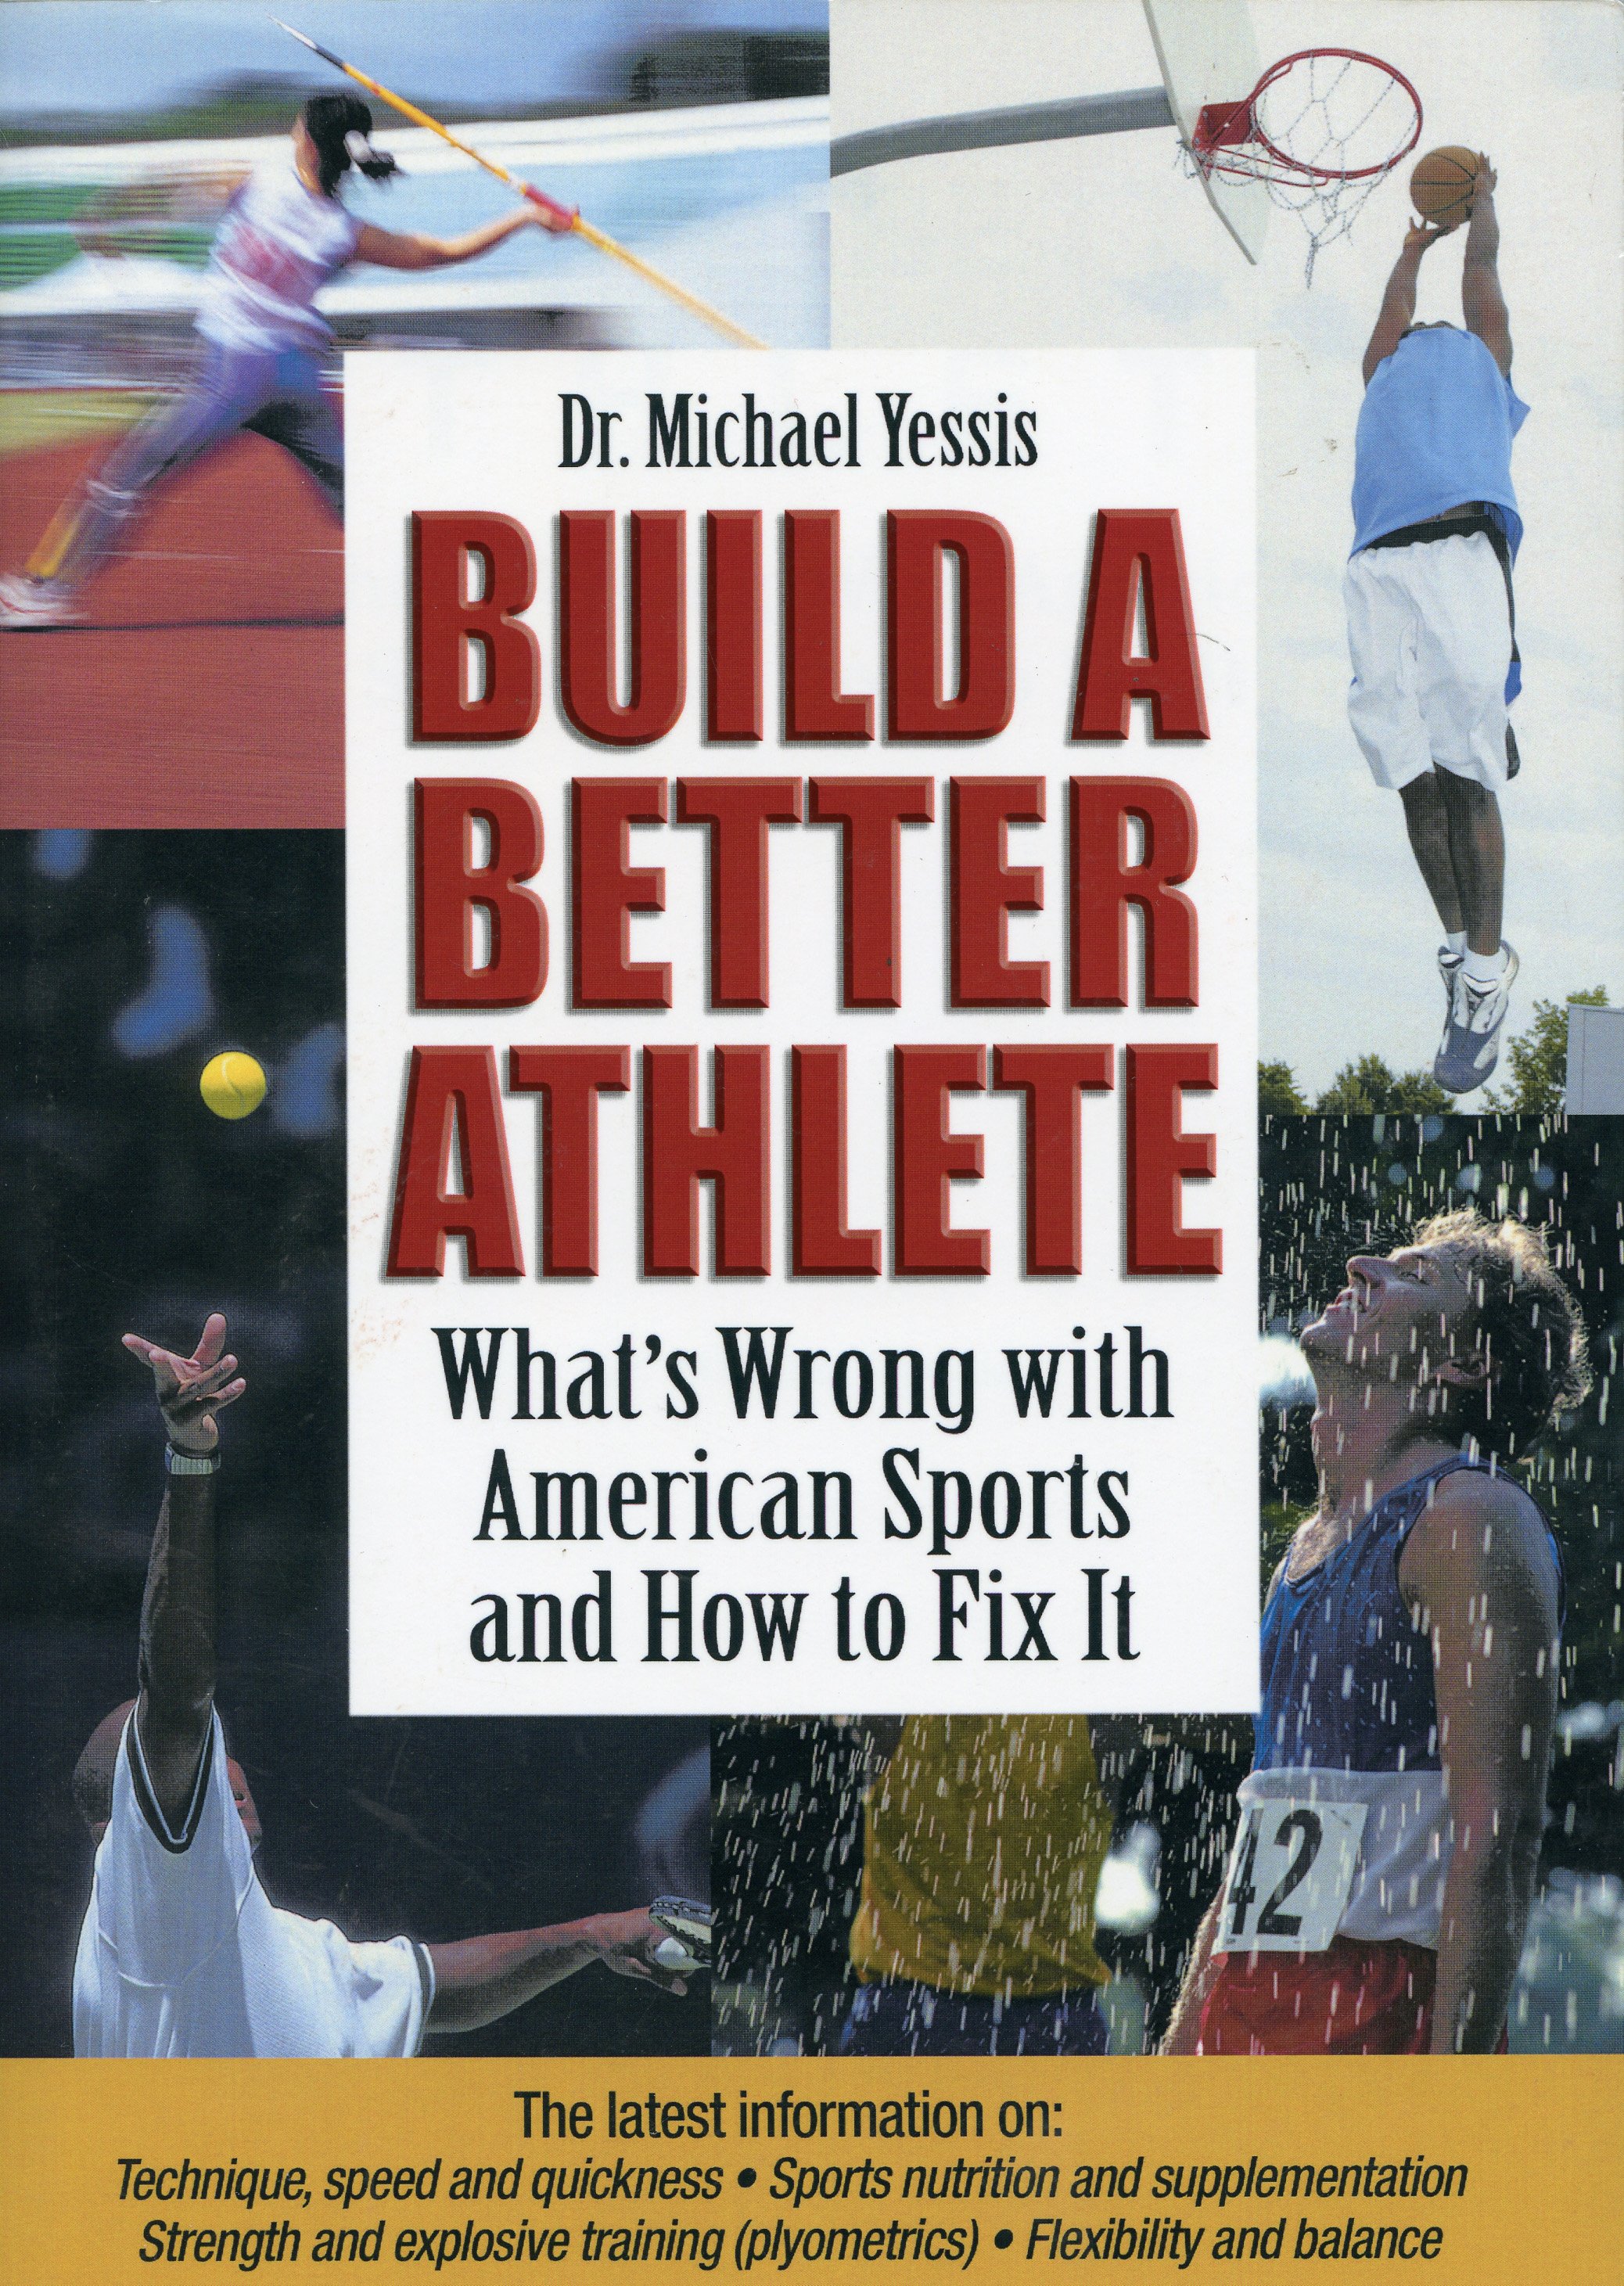 Are great athletes born or does practice make perfect? Are science and technique just as important as athletic ability? The truth is that anyone can improve their athletic performance. This book can show you how. In this simple and easy-to-read book, Dr. Michael Yessis dissects the current standards of physical training and explains how athletes of all levels can apply scientific techniques to develop their physical abilities.

by Dr. Michael Yessis
ISBN: 978-1-930546-78-3
$22.00
Published in 2006